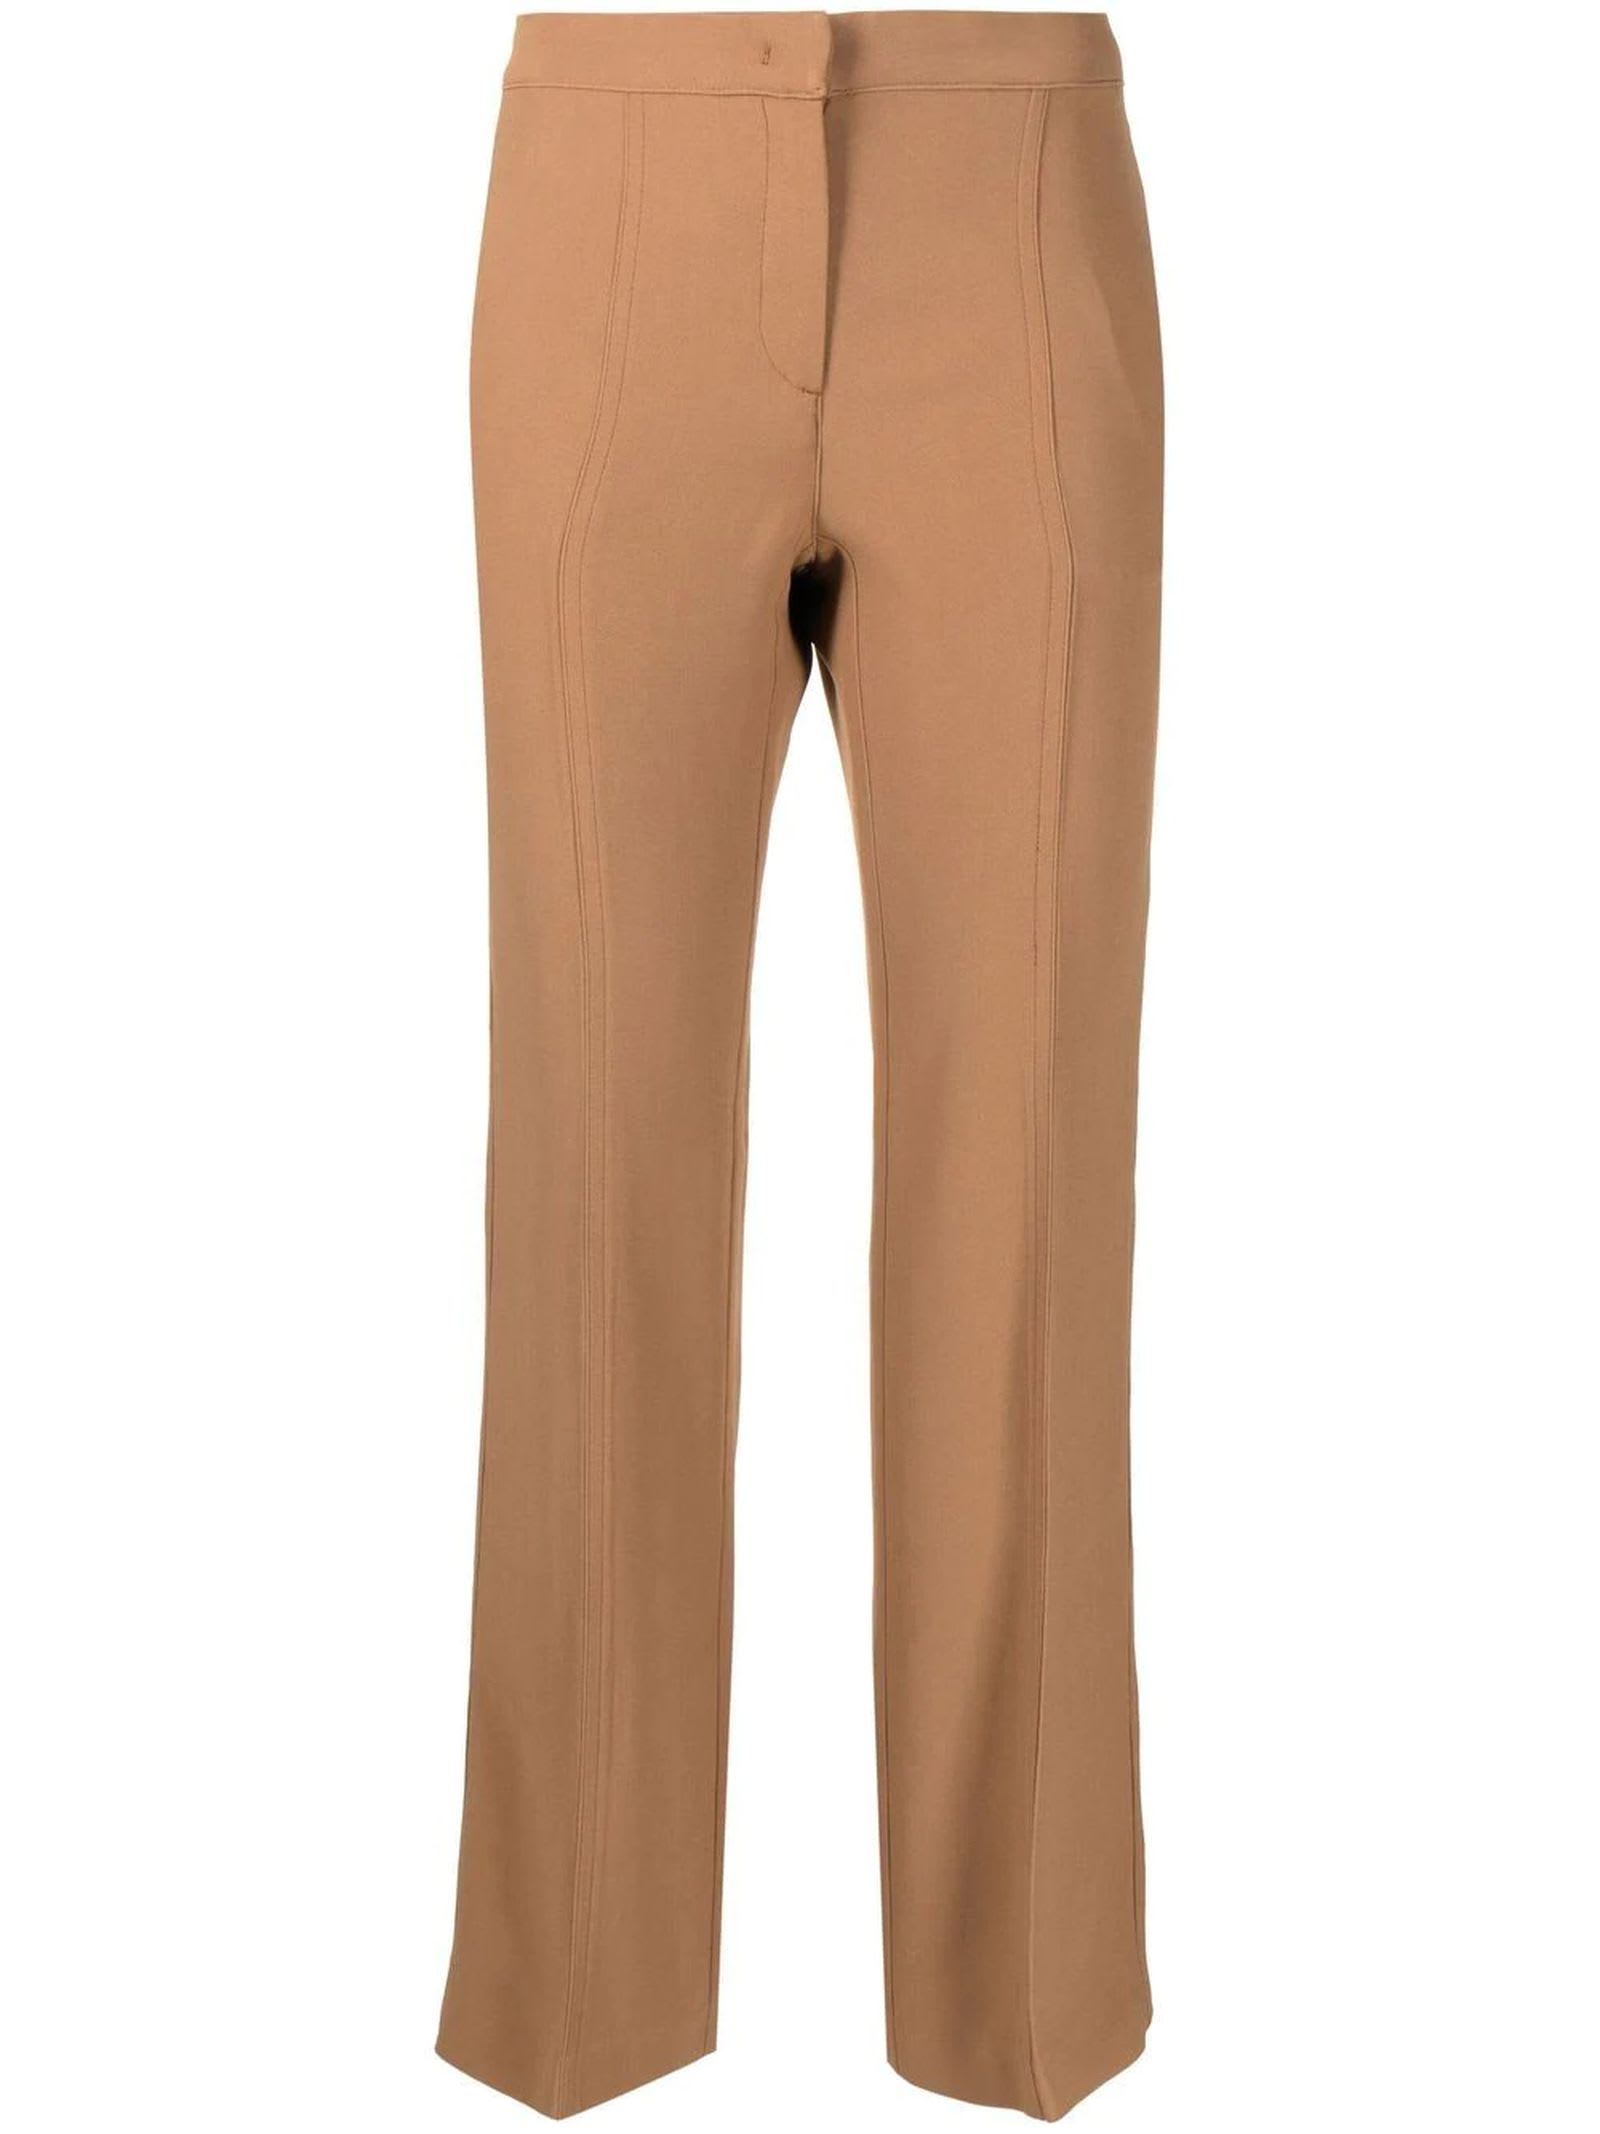 N.21 Camel Brown Cropped Flared Trousers